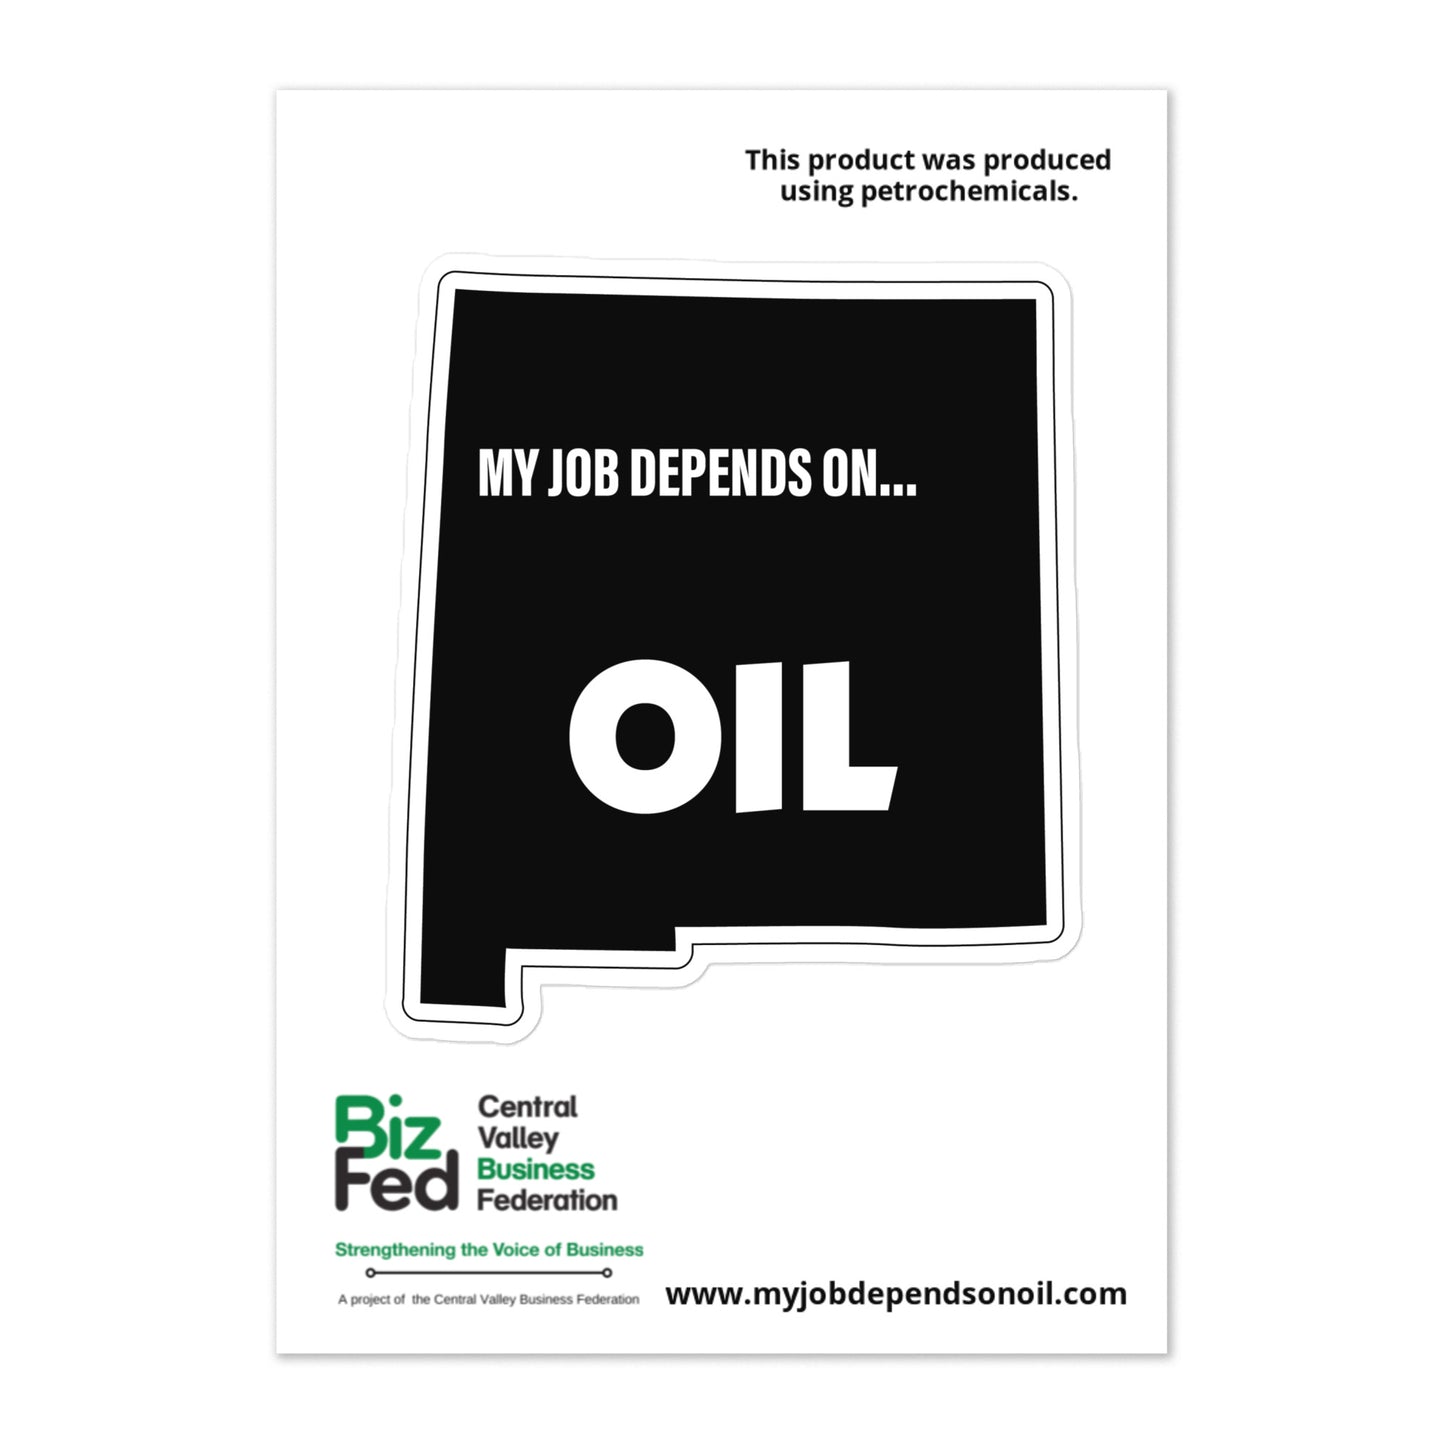 My Job Depends on Oil - New Mexico